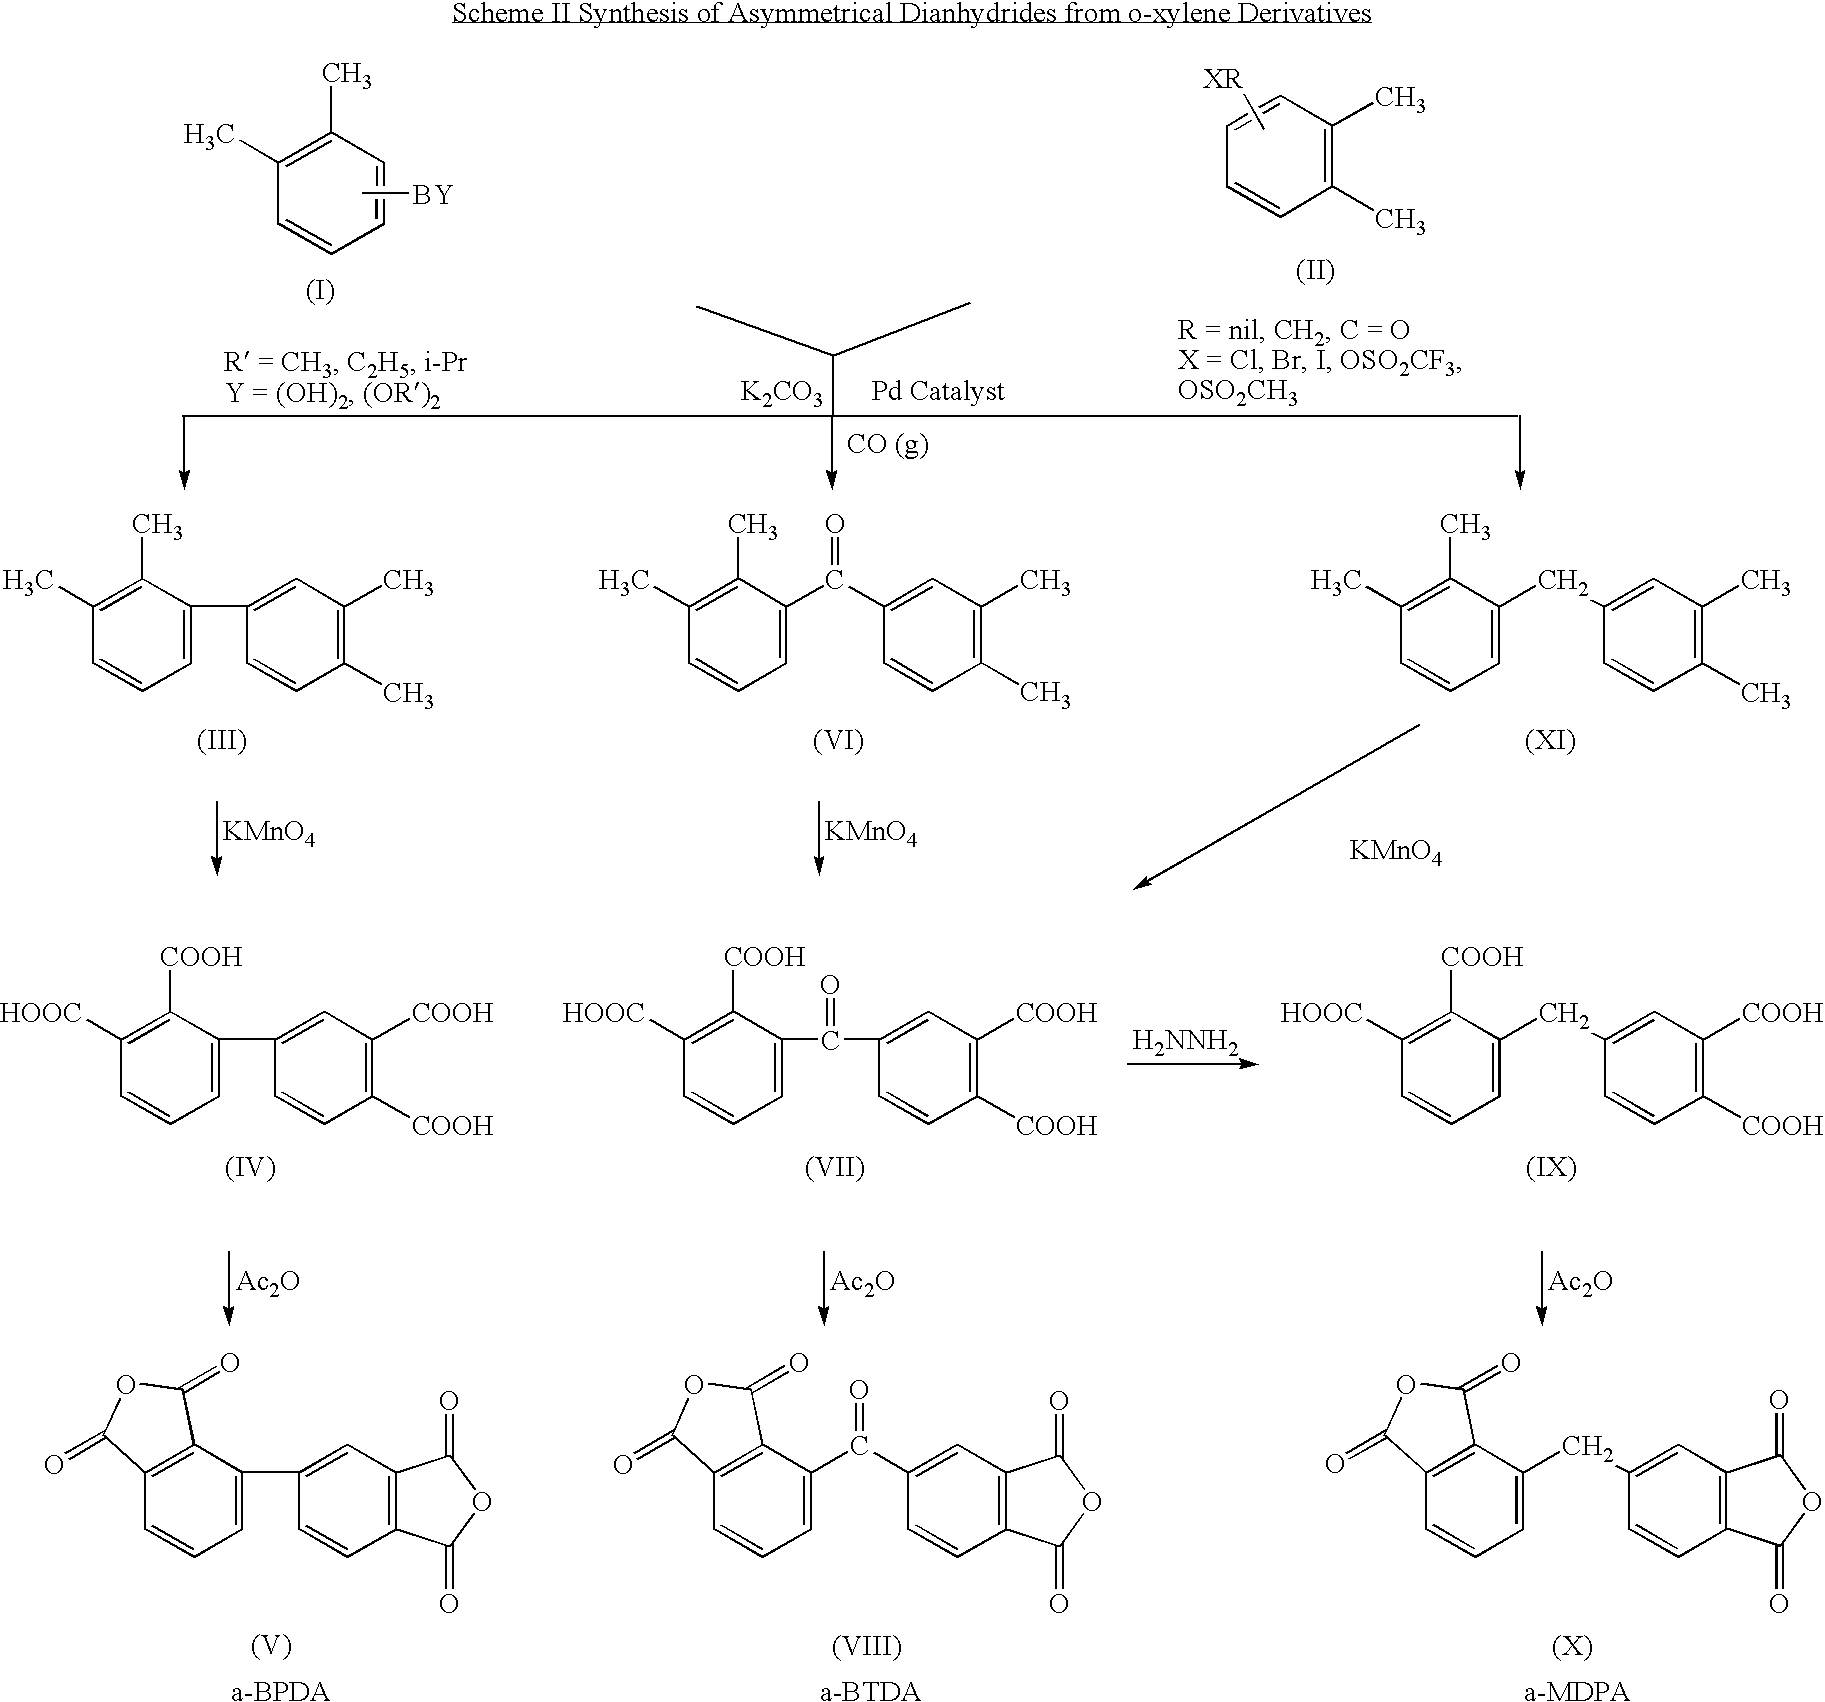 Synthesis of asymmetric tetracarboxylic acids and corresponding dianhydrides